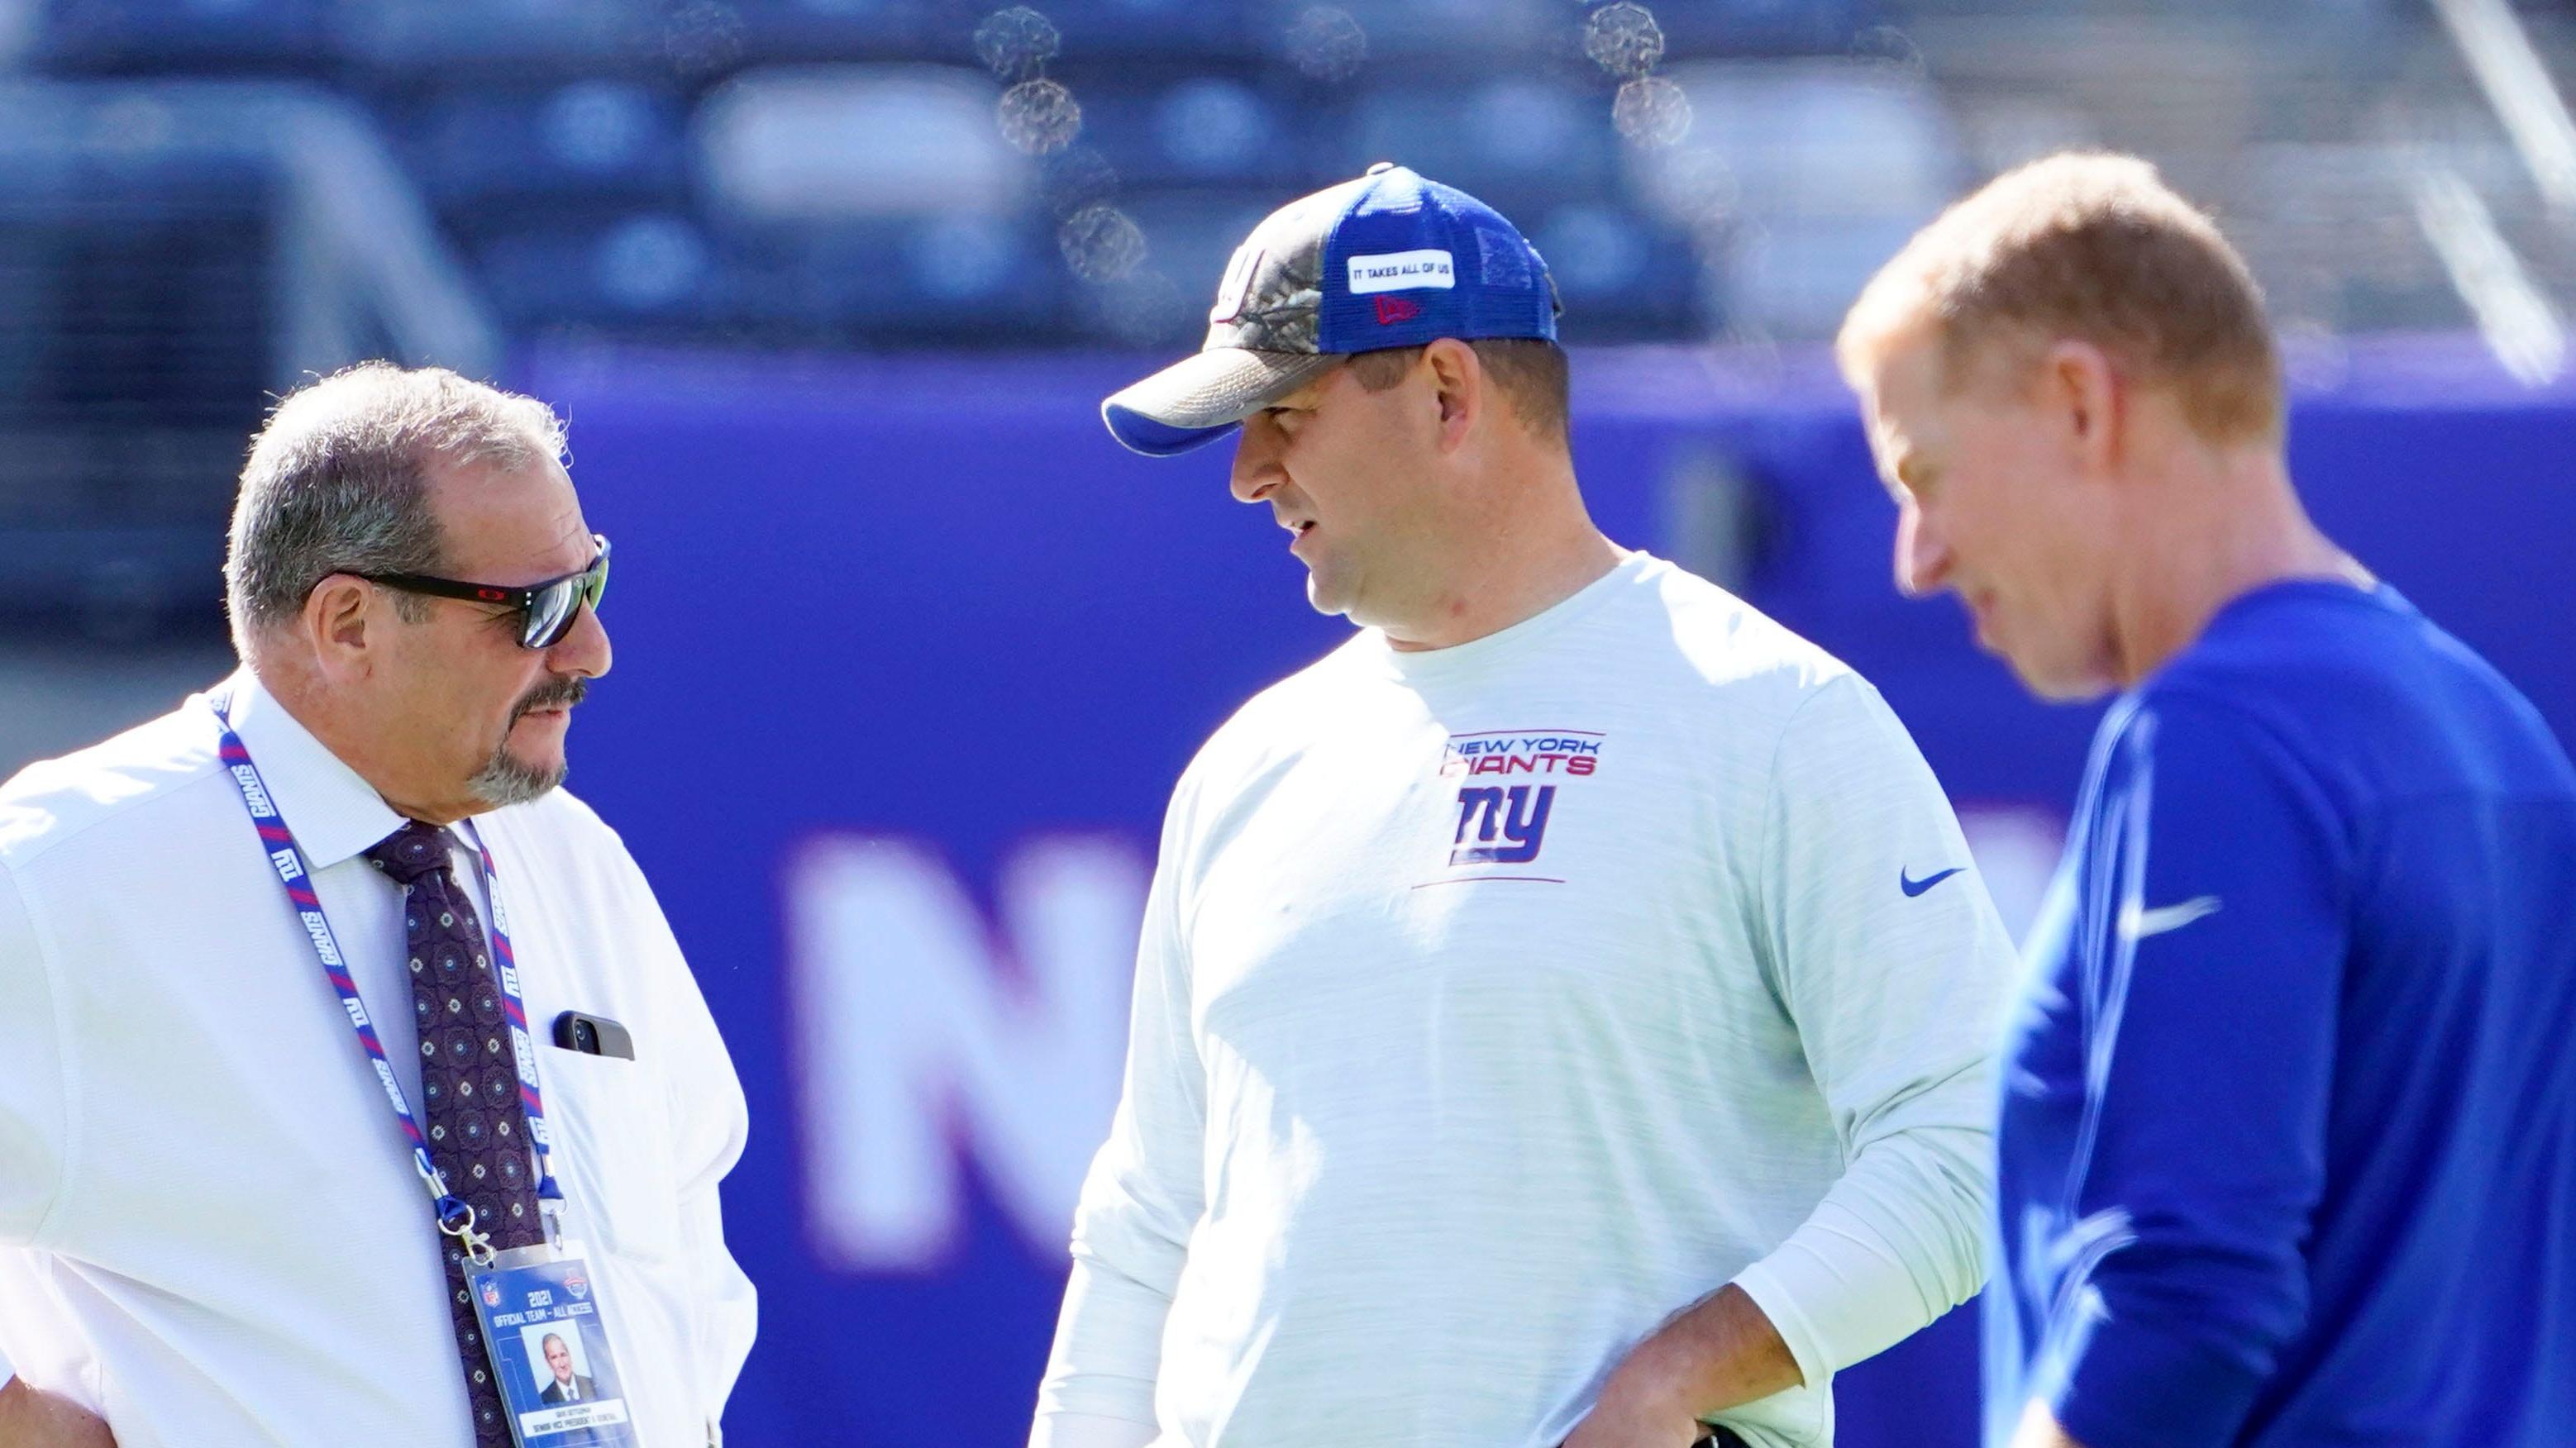 (from left) New York Giants general manager Dave Gettleman, head coach Joe Judge, and offensive coordinator Jason Garrett on the field before the game at MetLife Stadium on Sunday, Sept. 26, 2021, in East Rutherford. / © Danielle Parhizkaran/NorthJersey.com via Imagn Content Services, LLC